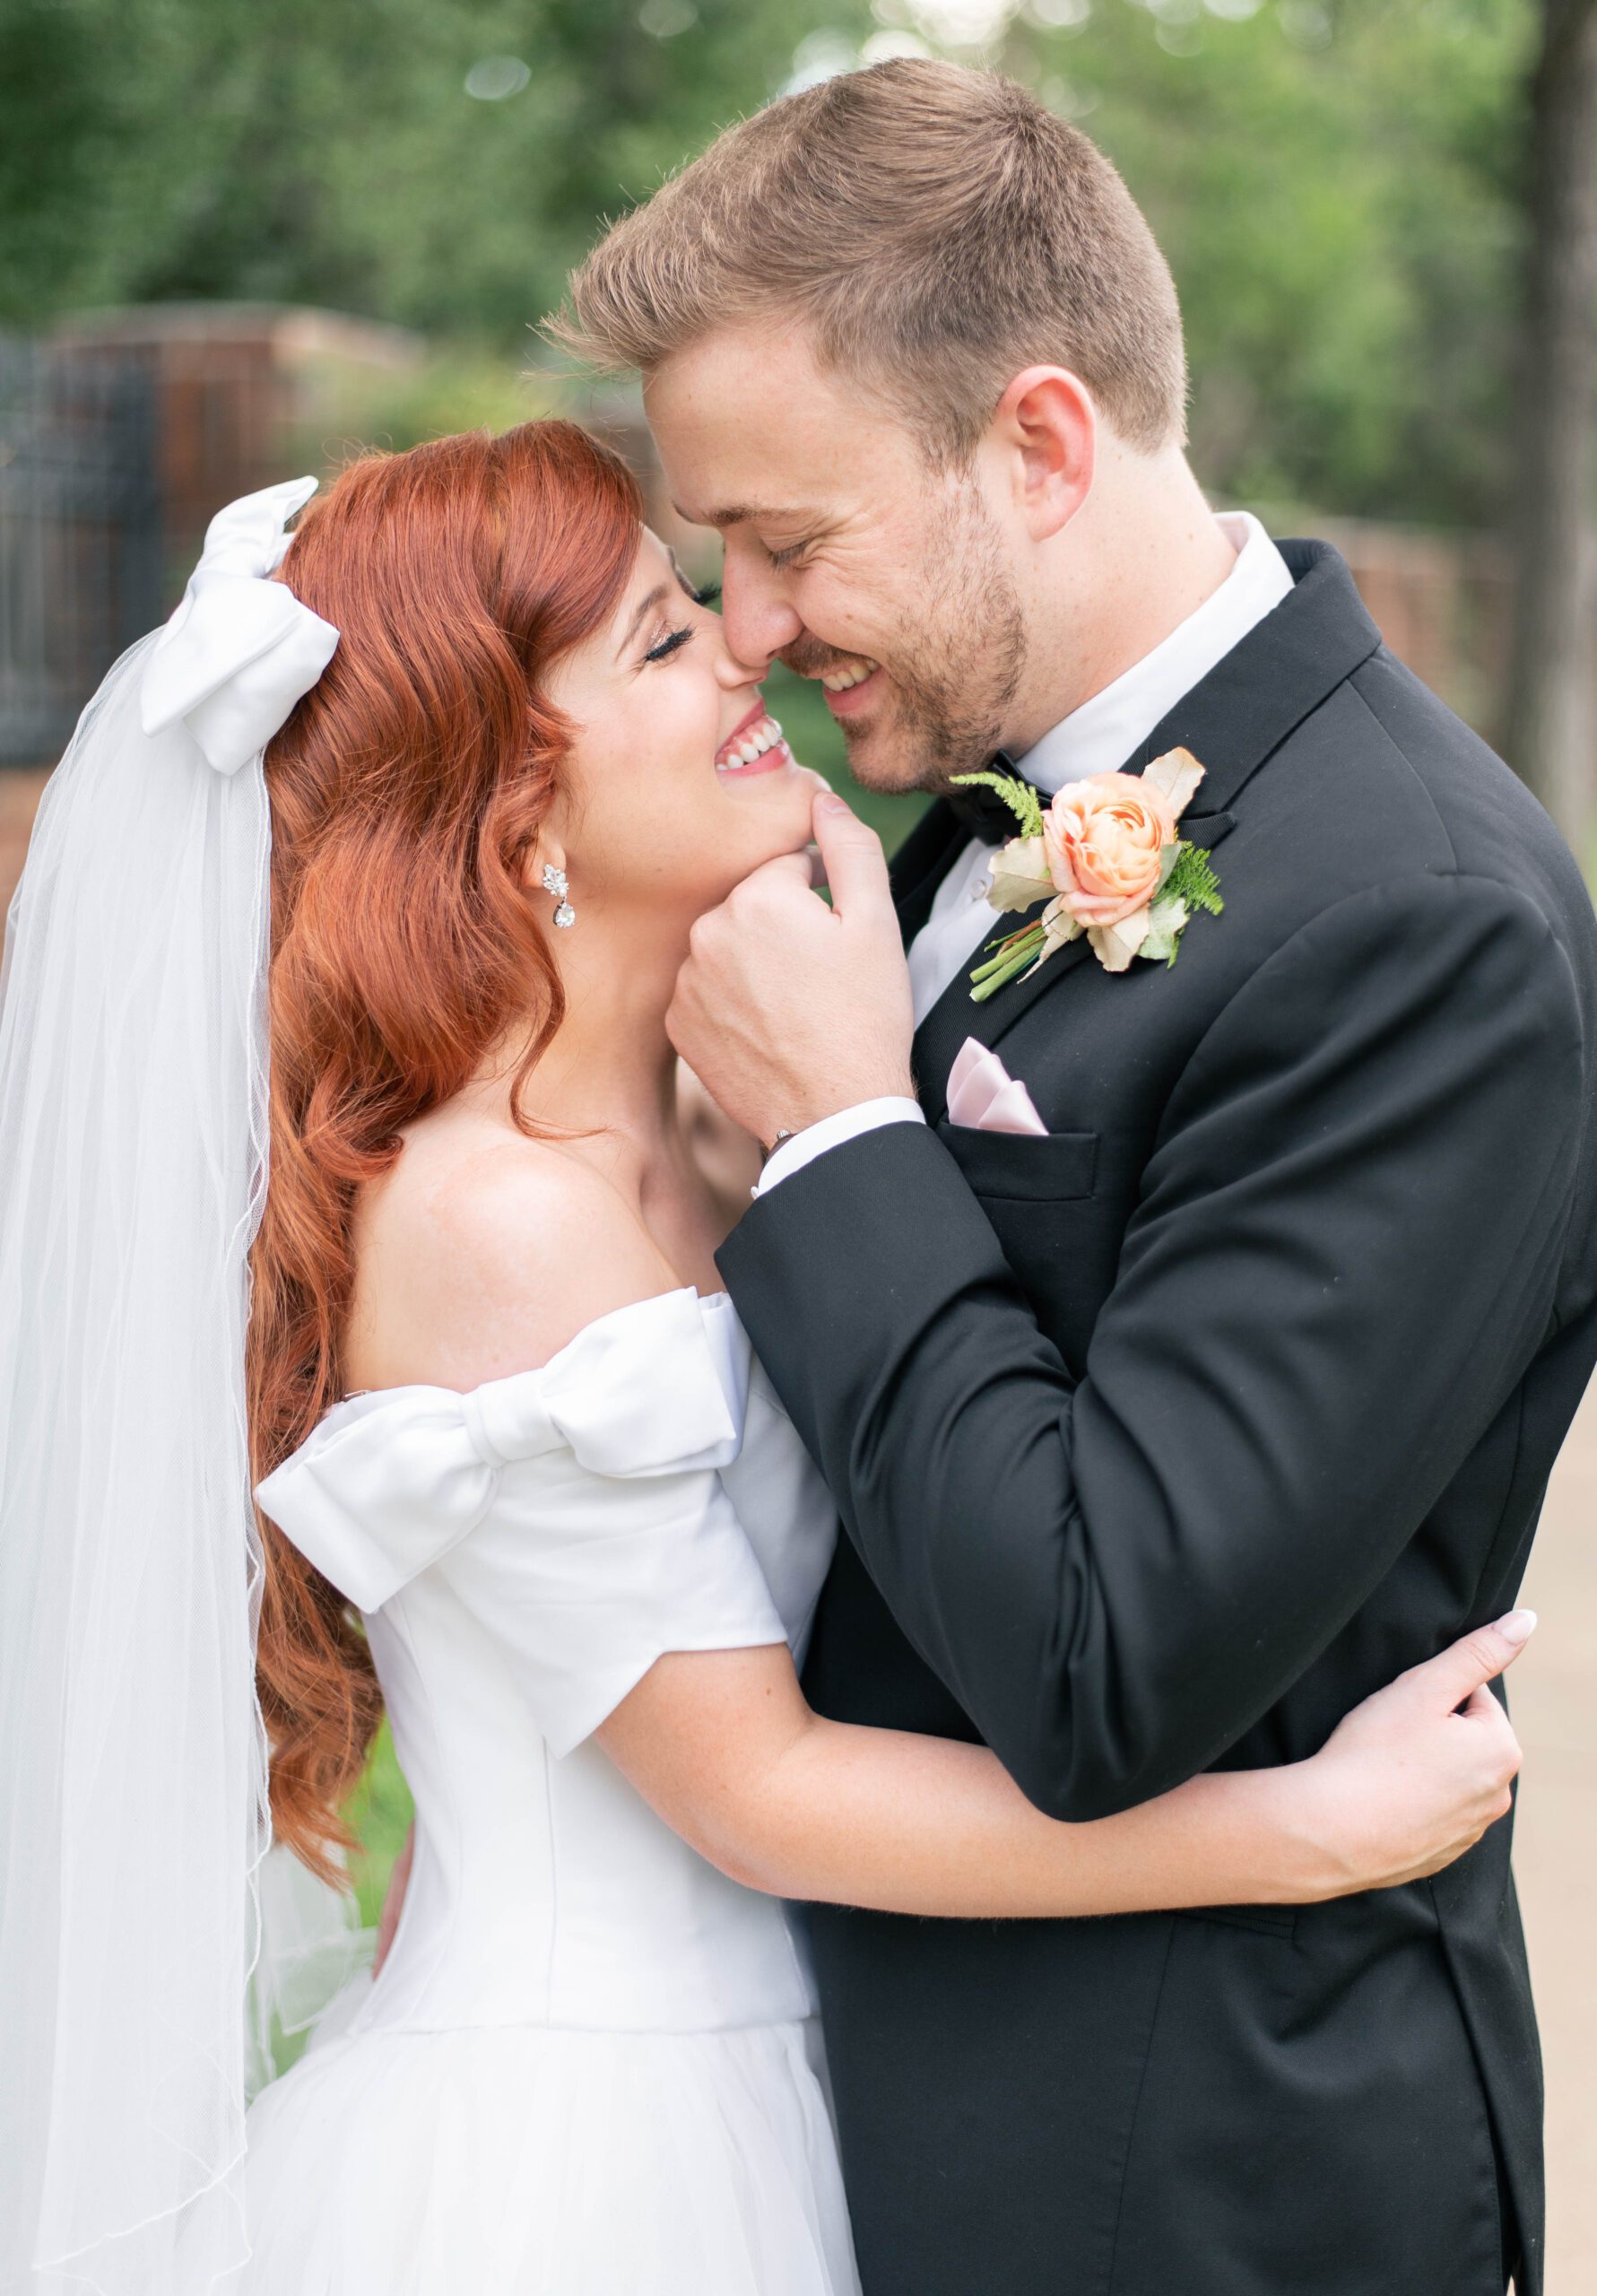 bride and groom smile at each other while he gently touches her chin, leaning in for a sweet kiss